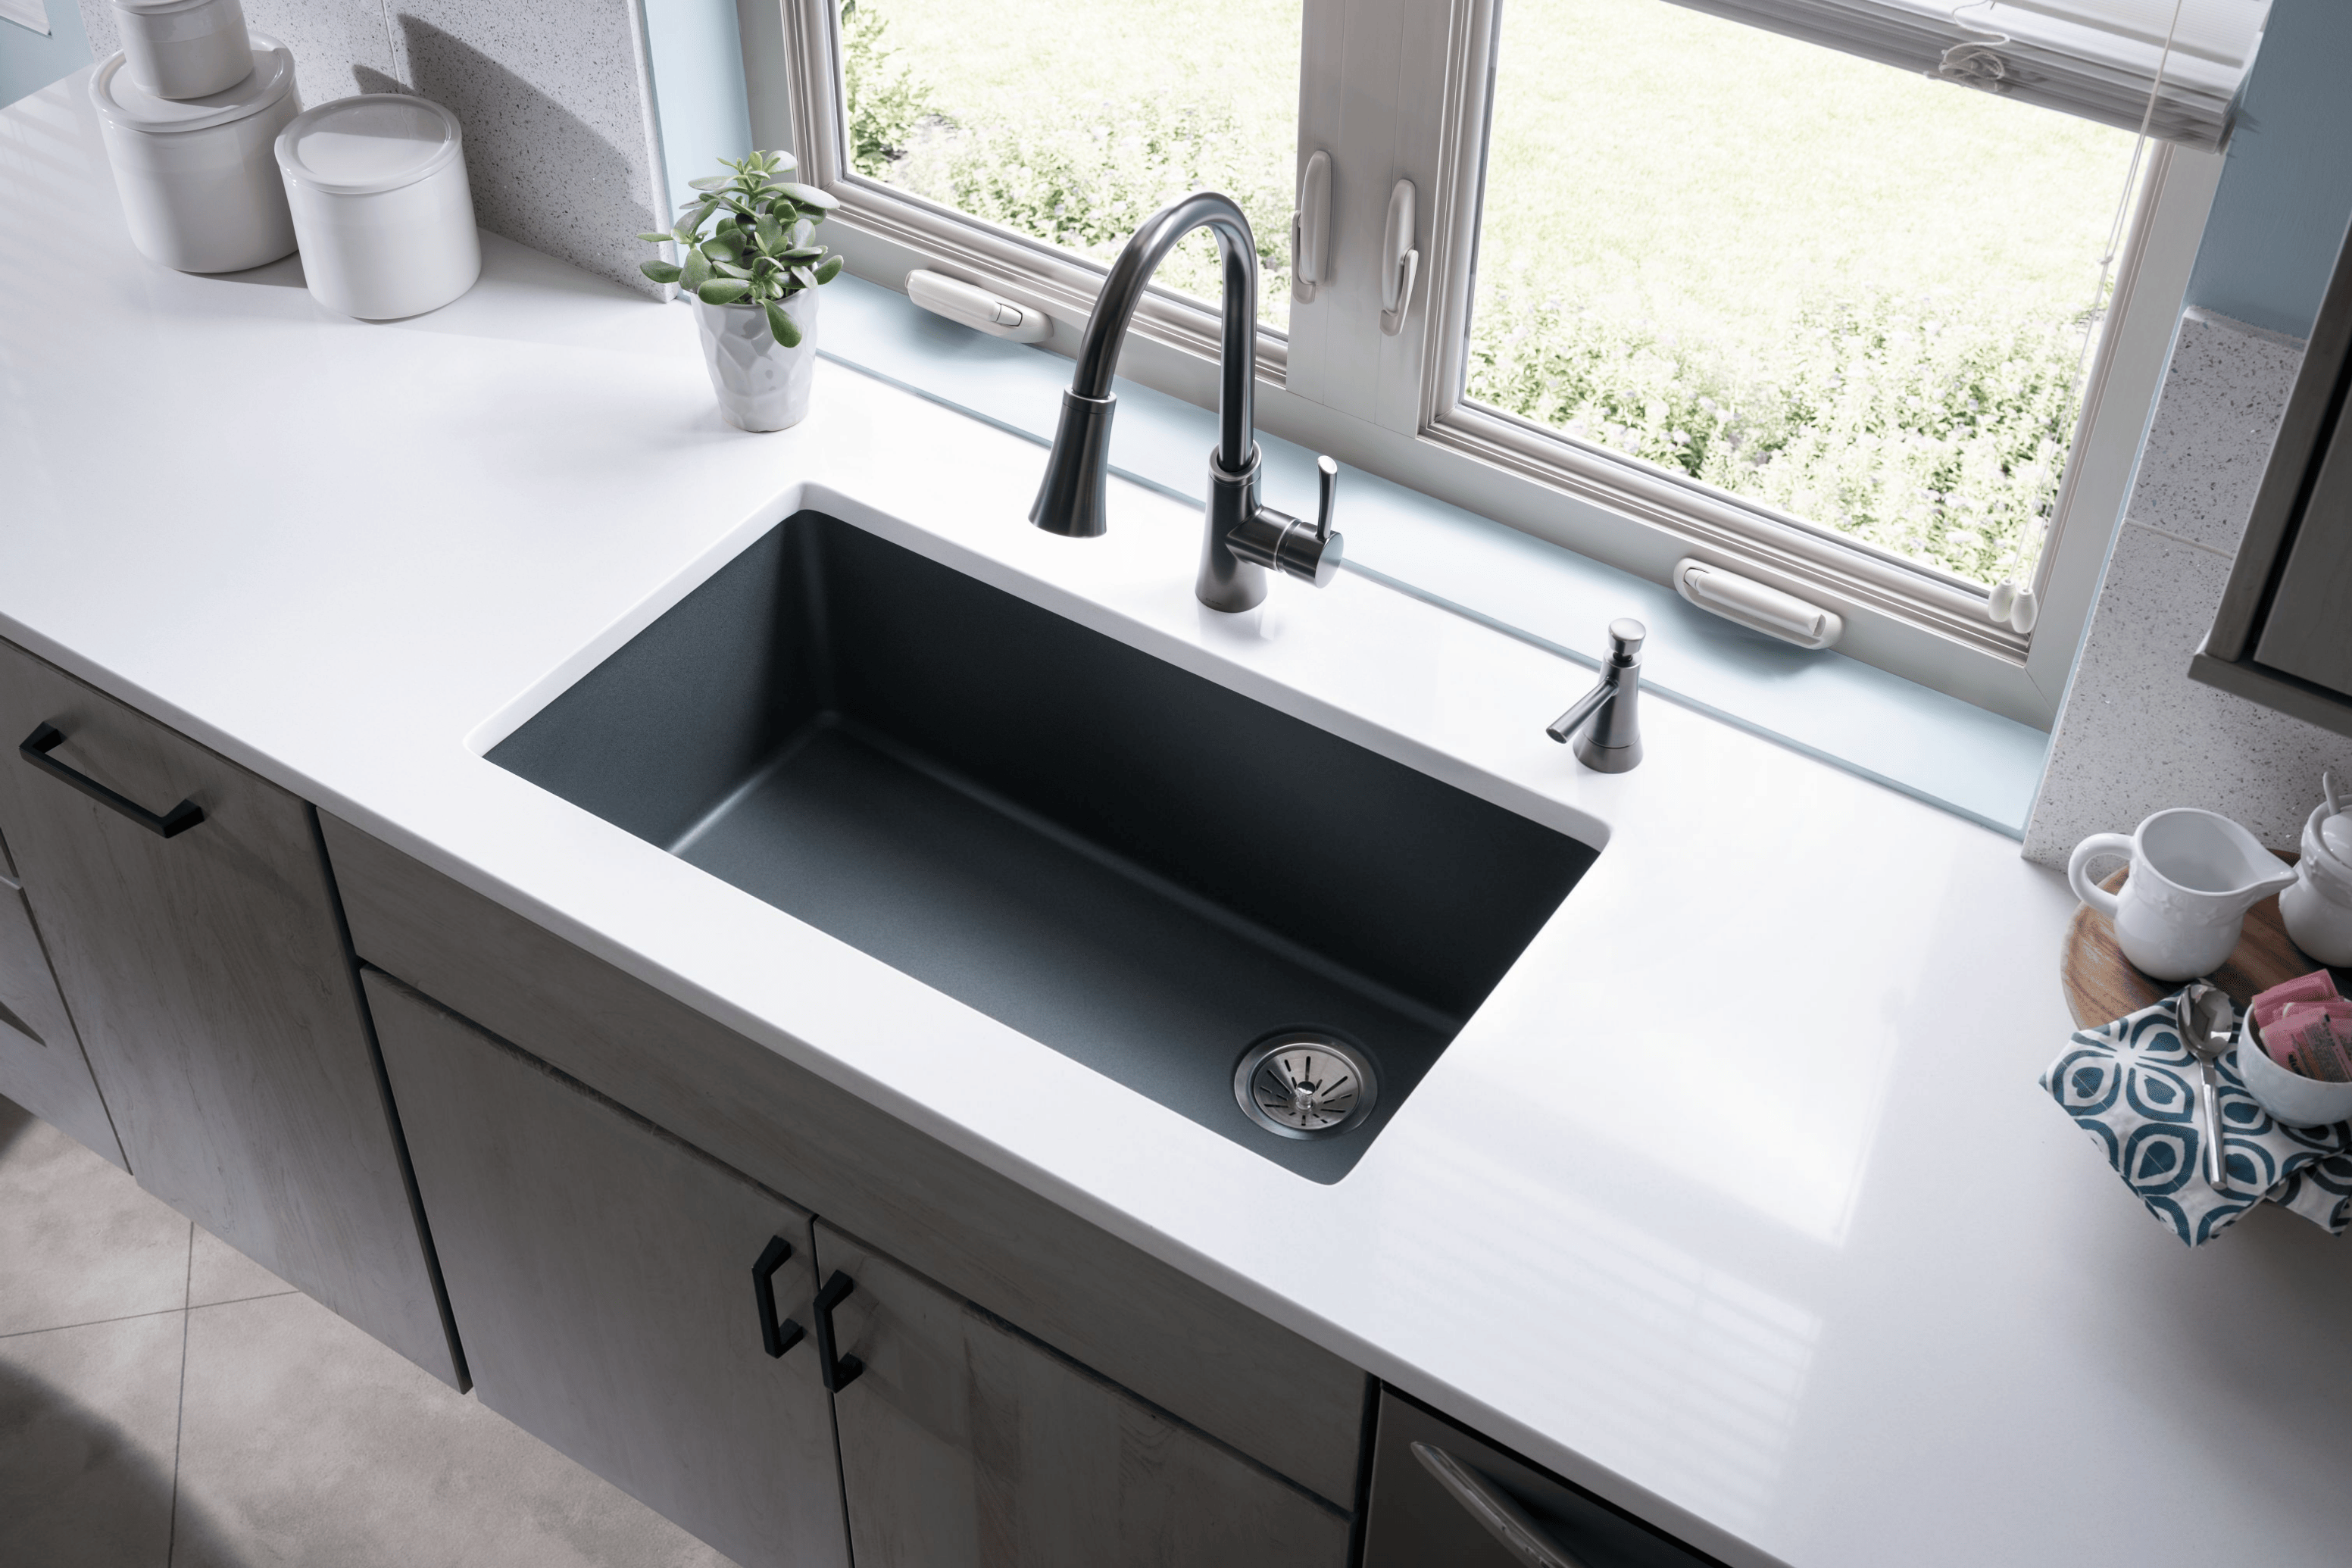 Quartz Sinks Everything You Need to Know